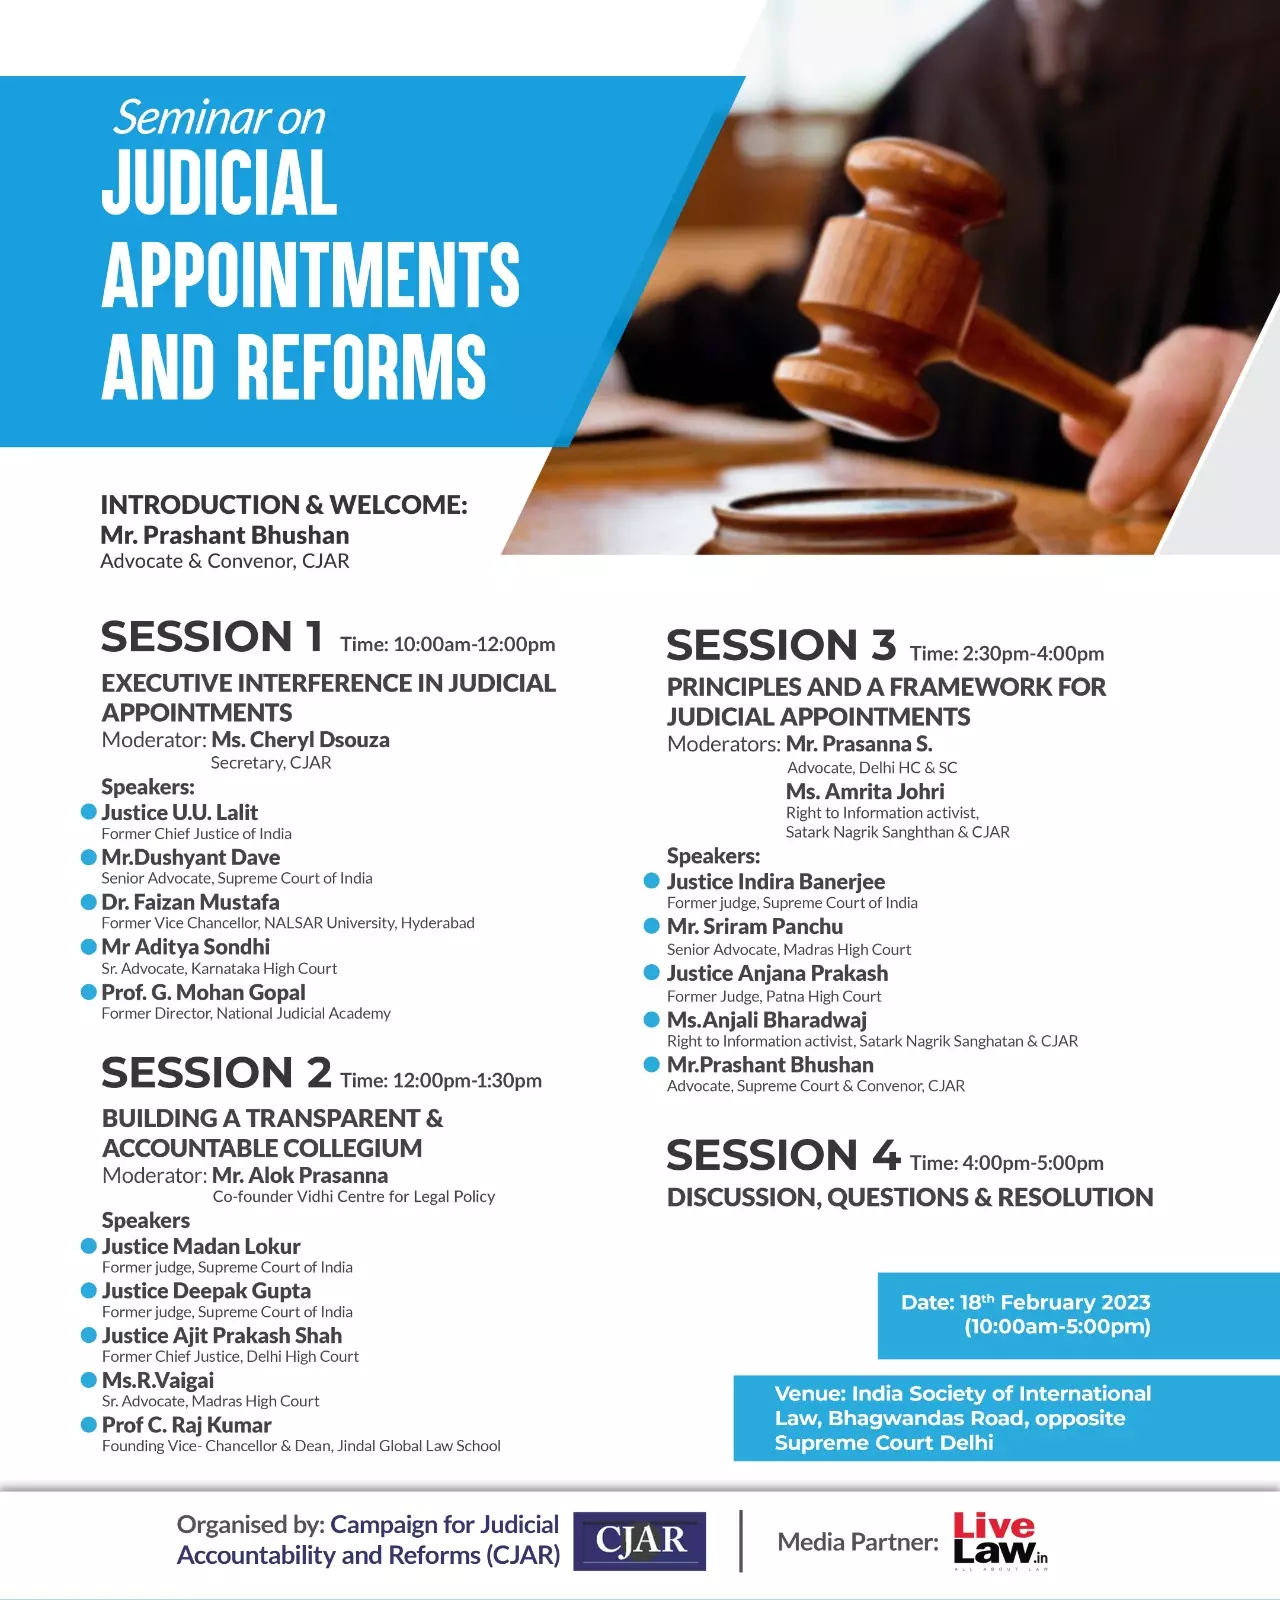 CJAR & LiveLaw Seminar On Judicial Appointments And Reforms- TOMORROW AT 10 AM